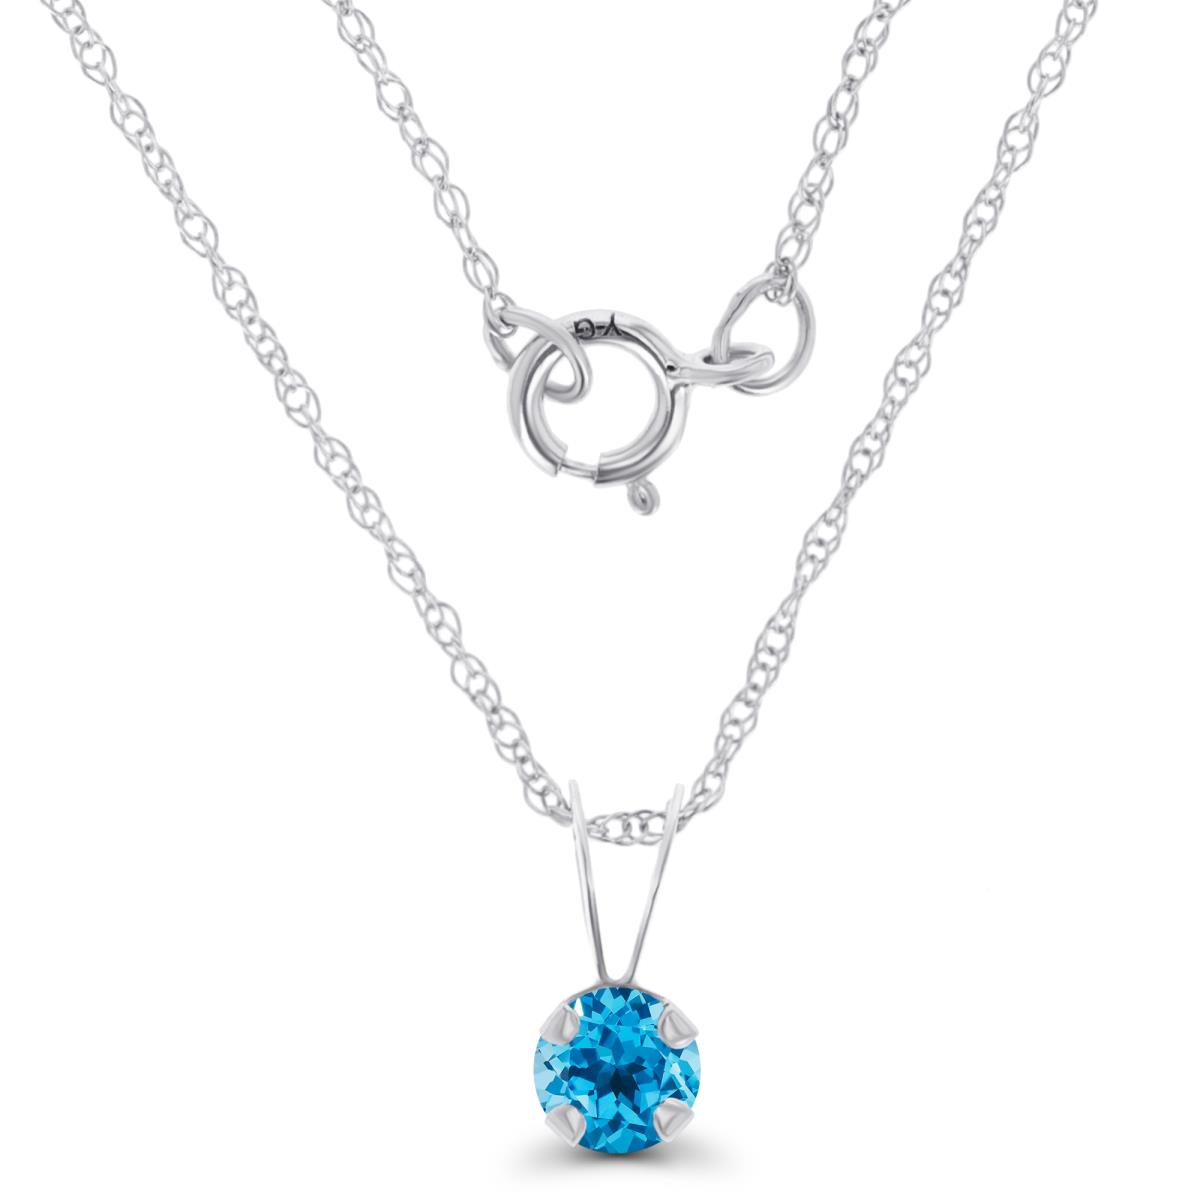 14K White Gold 4mm Round Swiss Blue Topaz 18" Rope Chain Necklace